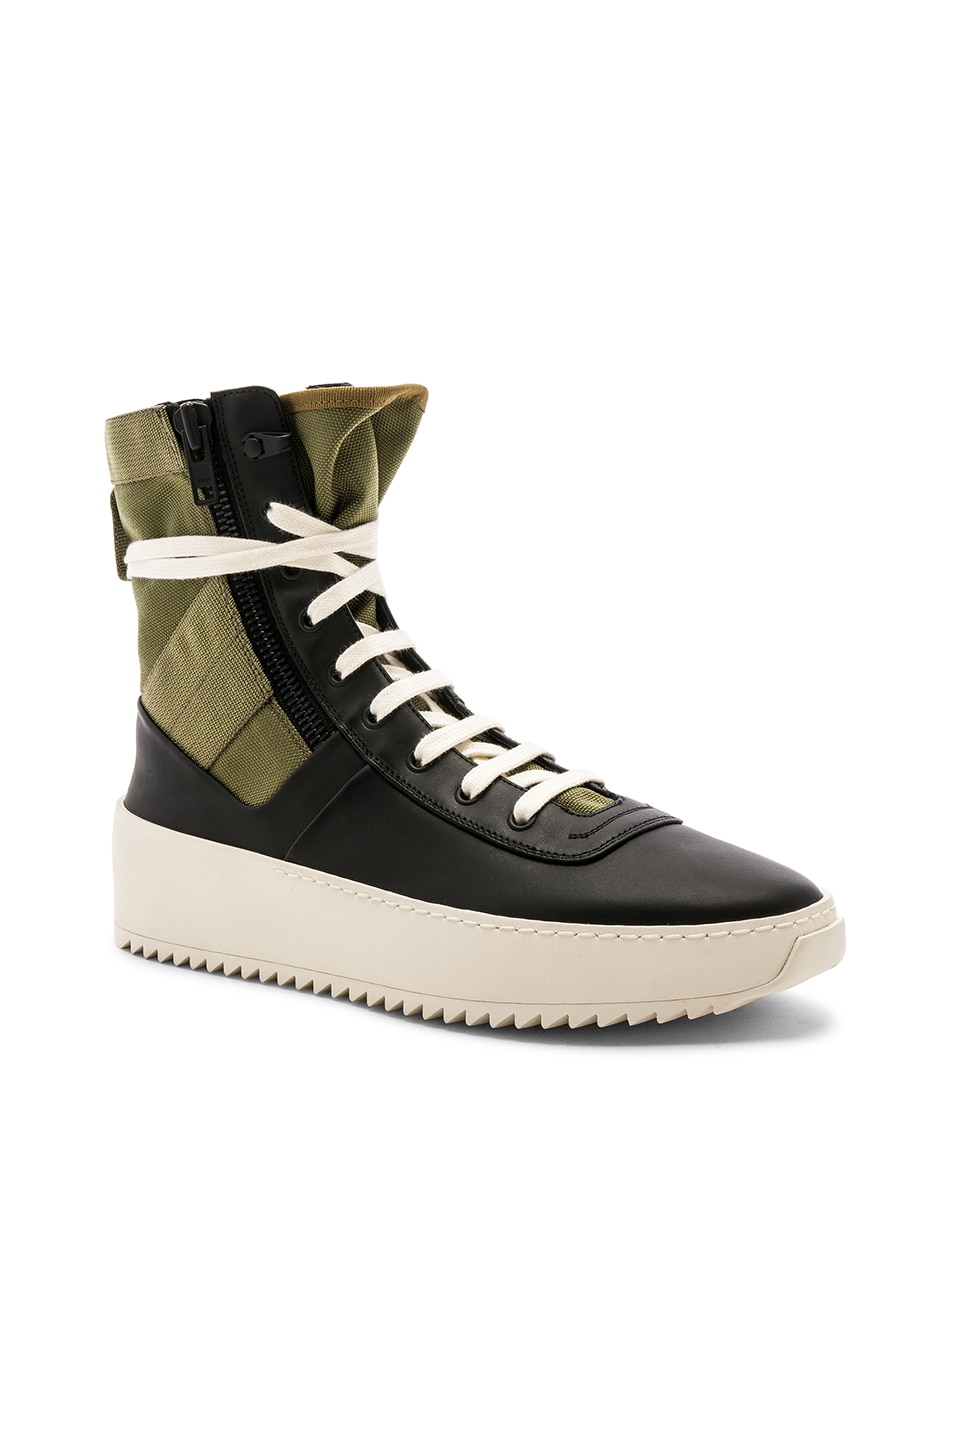 Image 1 of Fear of God Jungle Sneakers in Black & Foliage